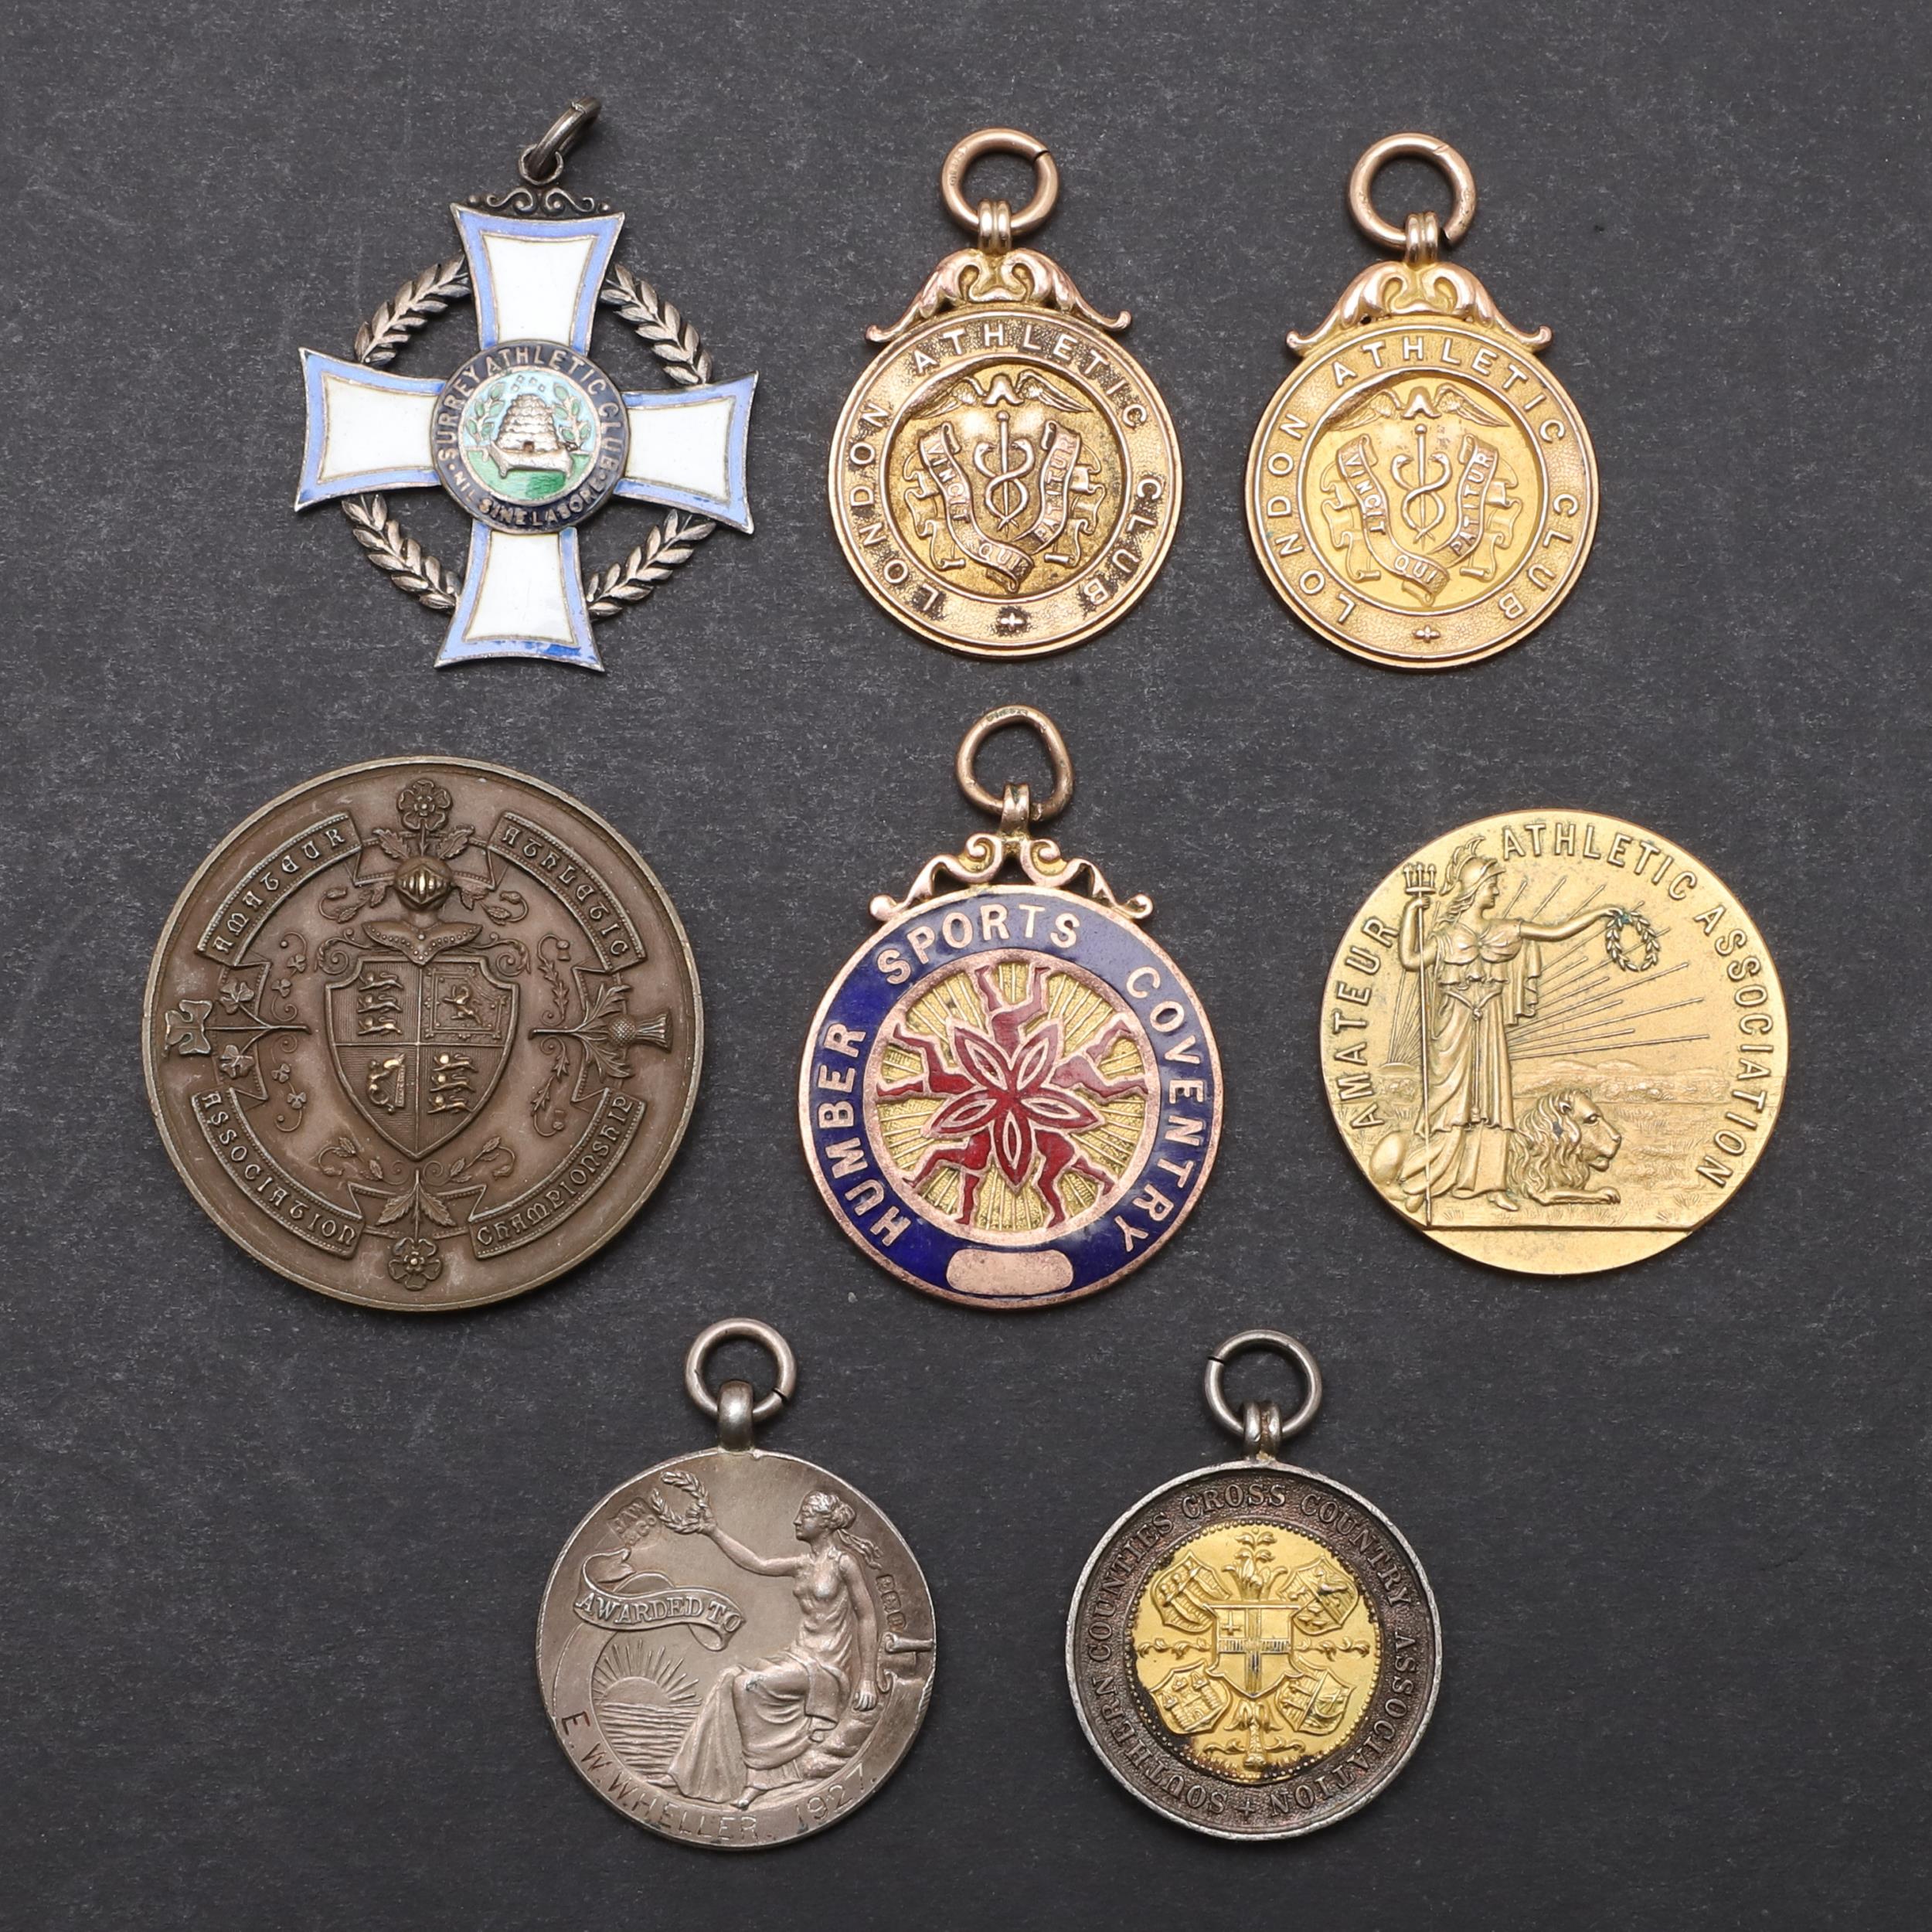 A COLLECTION OF GOLD AND SILVER SPORTING MEDALS TO INCLUDE A 1920'S OLYMPIC TRIALS MEDAL.